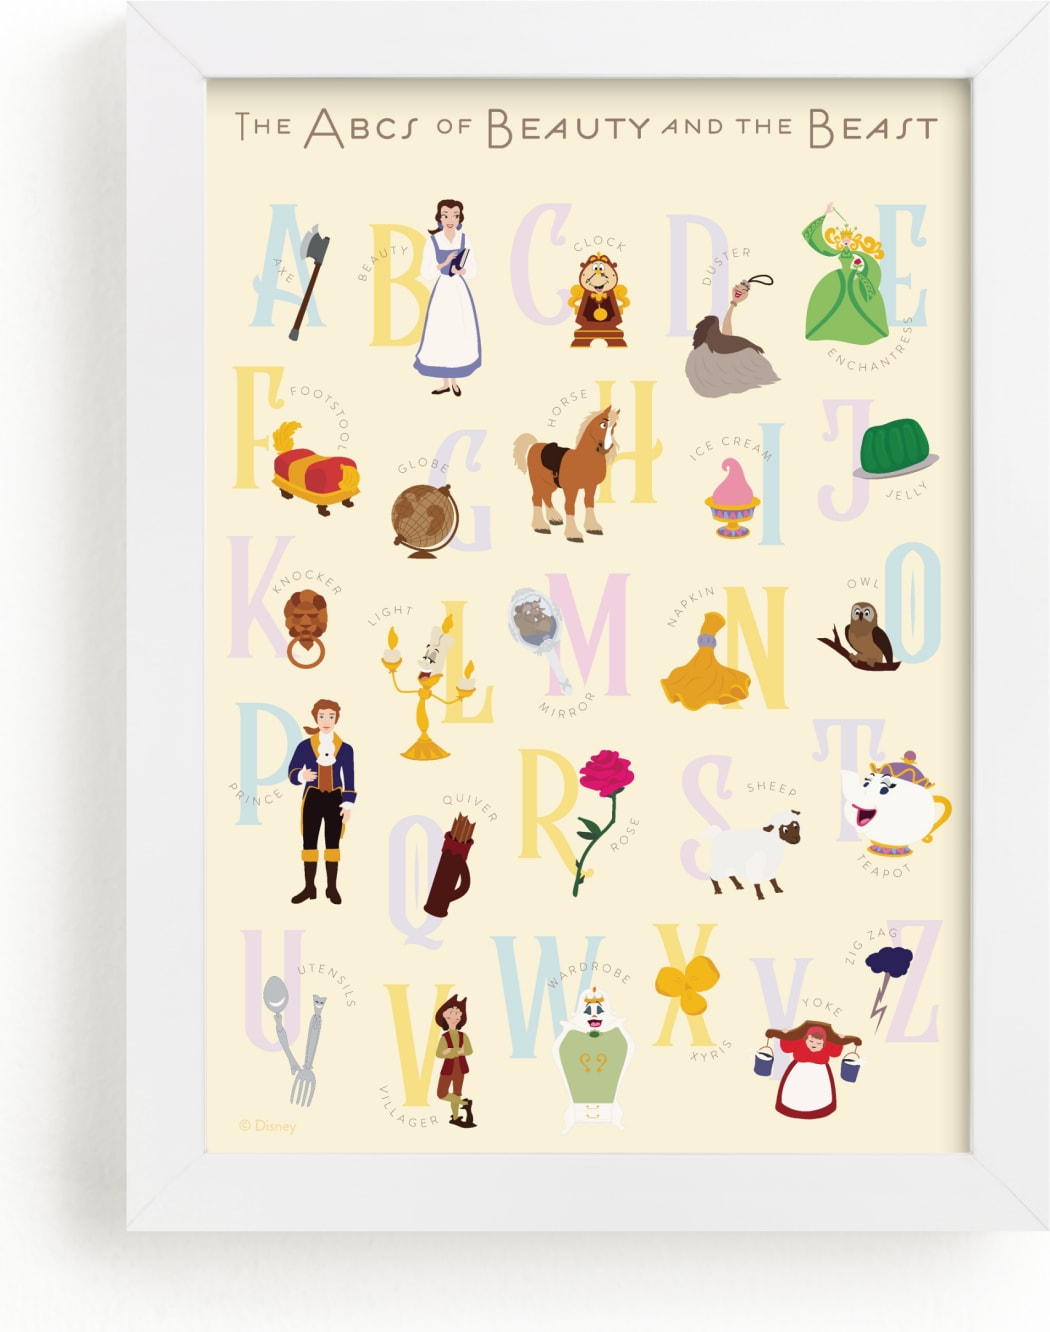 This is a colorful disney art by Christie Kelly called The ABCs of Disney's Beauty and the Beast.